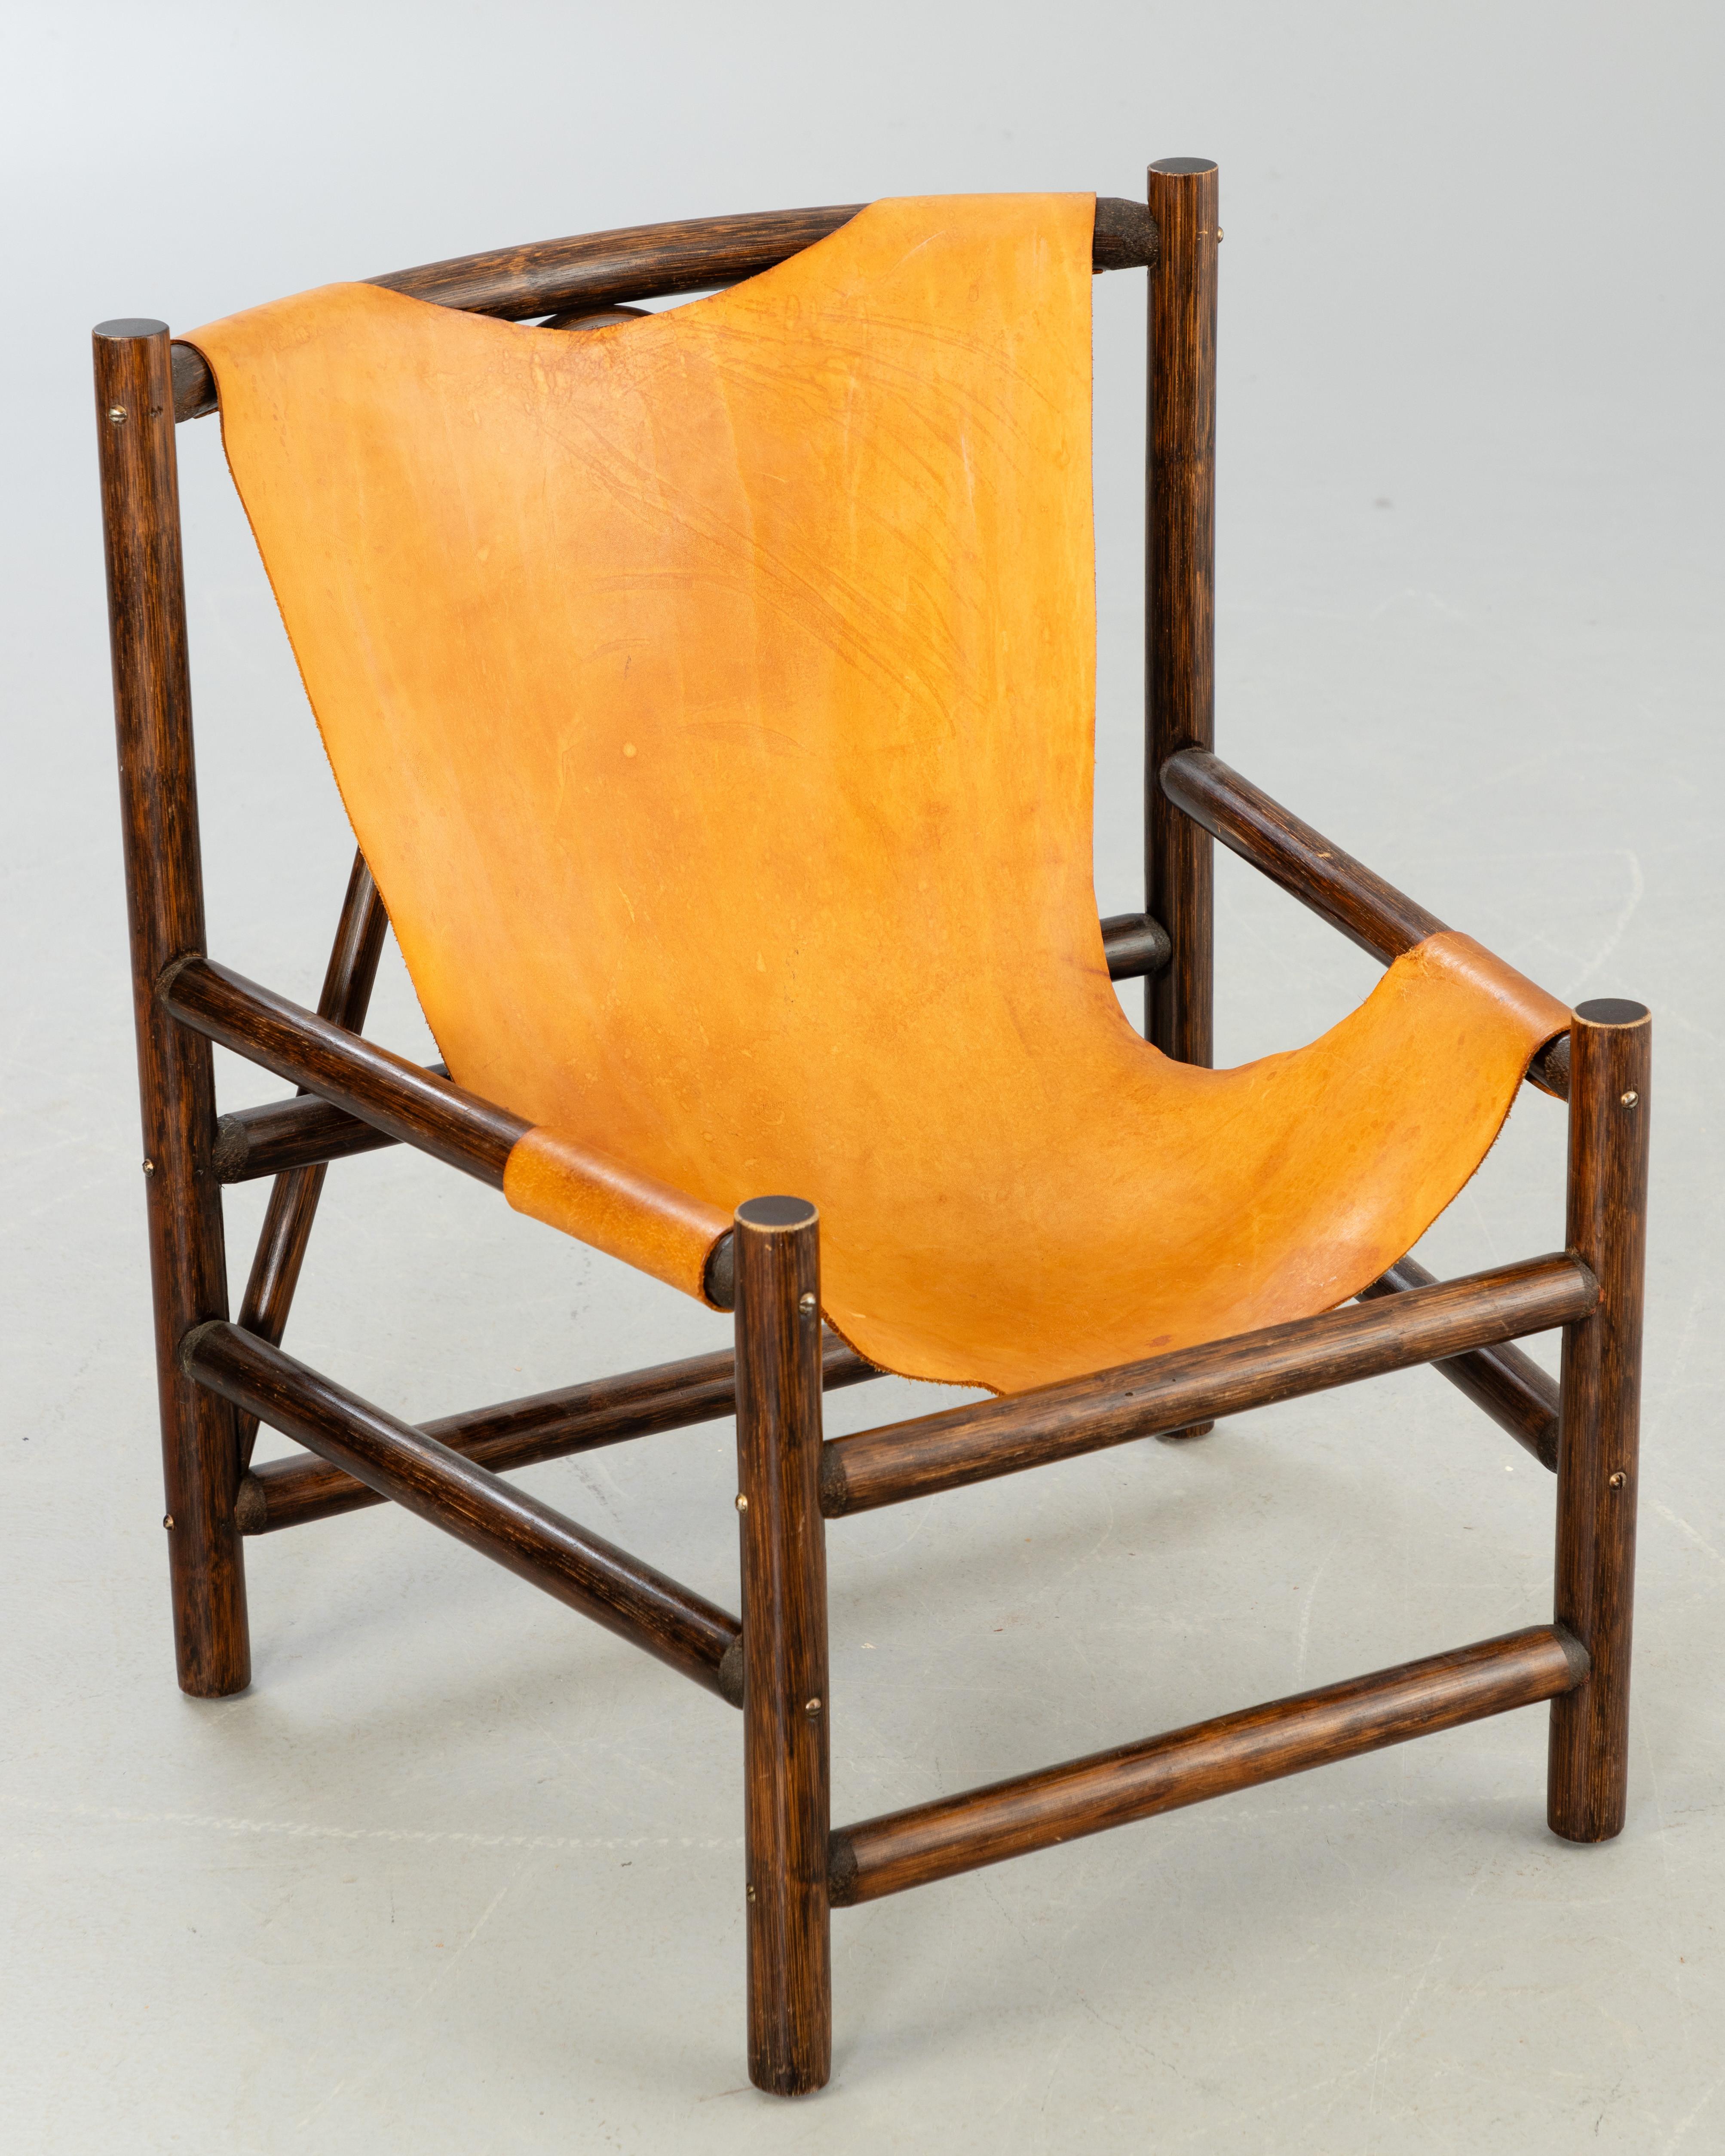 Very nice and unusual chair designed and made by unknown manufacturer, Sweden around 1960. This chair was inspired by several chairs designed by Carl-Axel Acking . This chair is made of solid wood and has a thick natural leather seat. The chair is